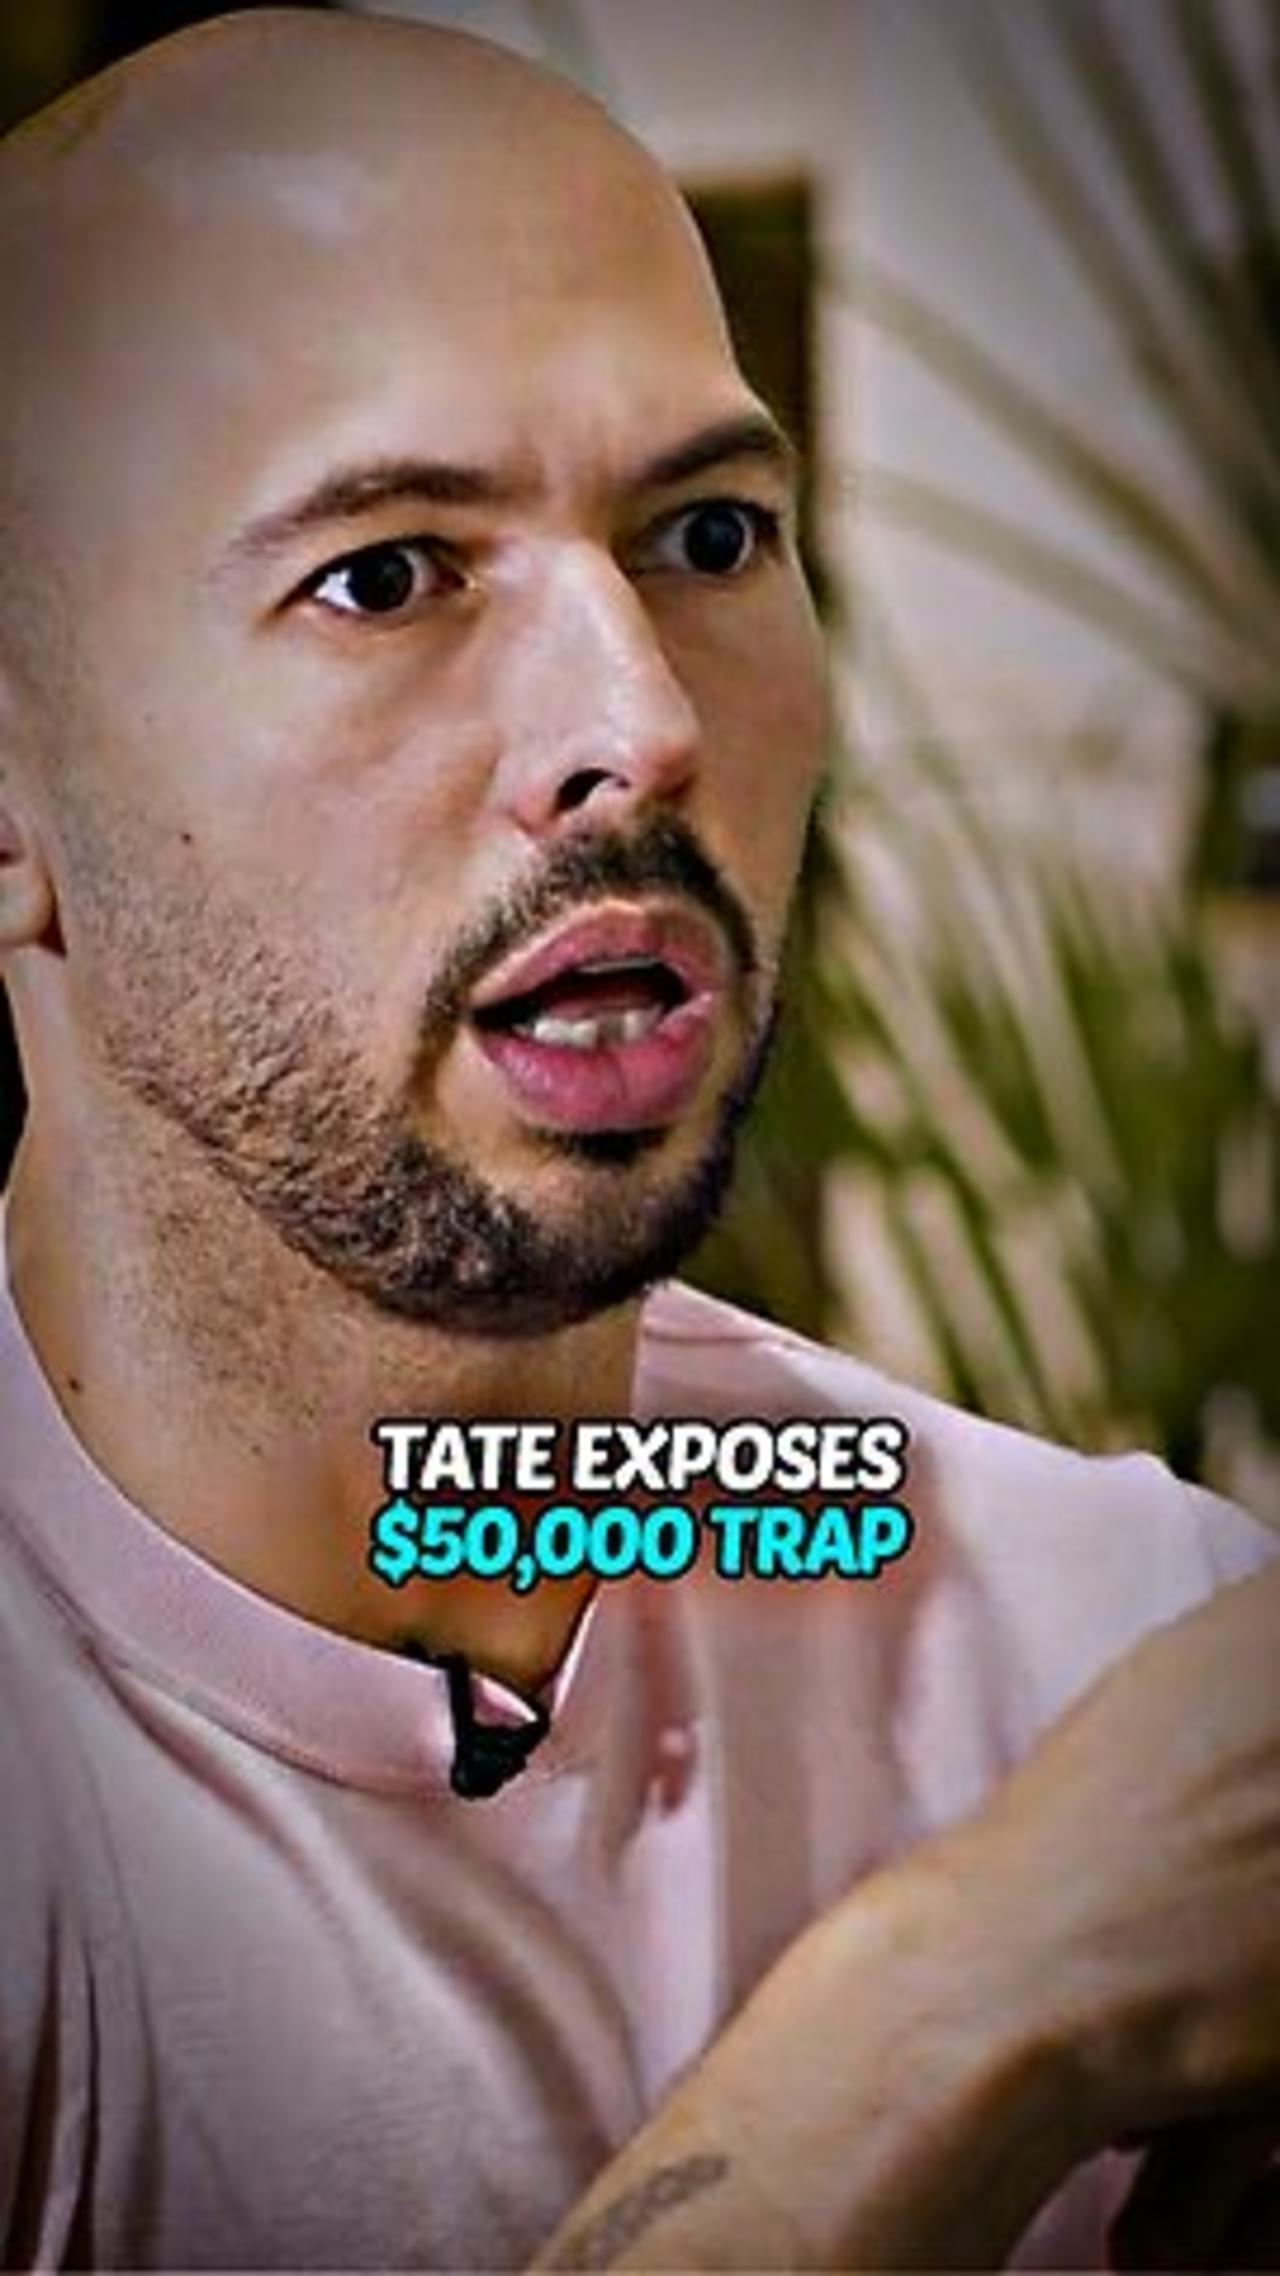 Andrew Tate exposes $50,000 trap